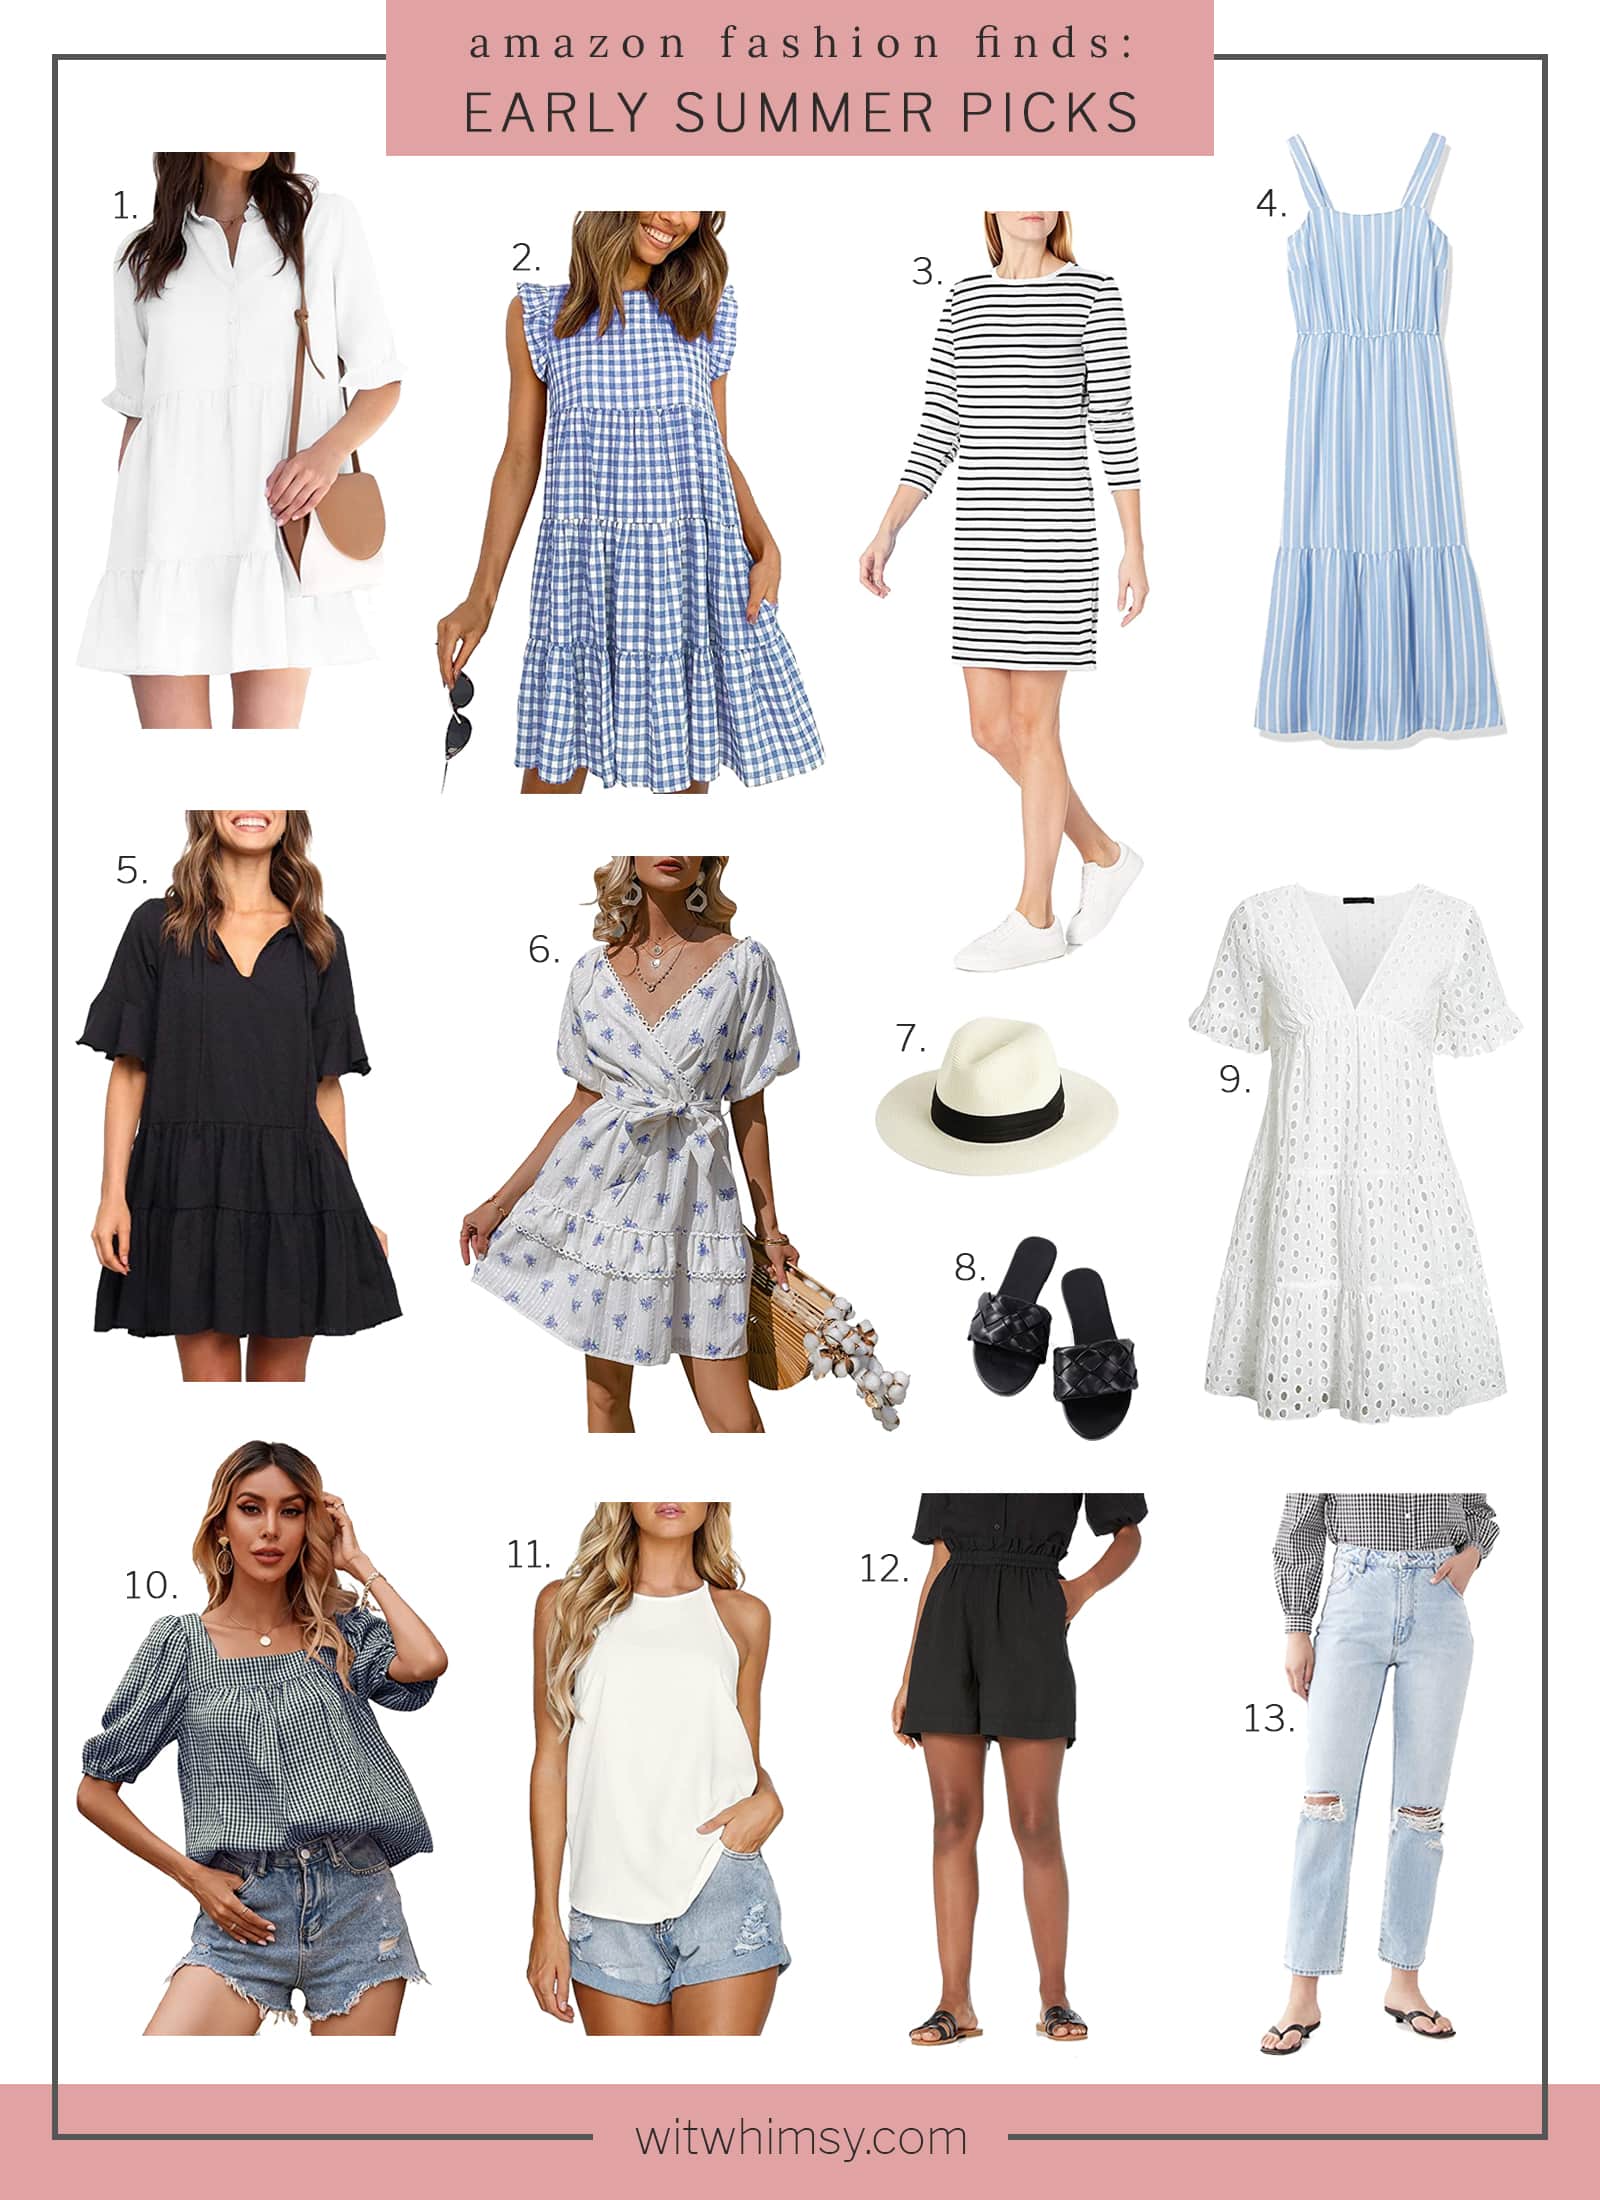 Tips for Shopping on Amazon Fashion + Early Summer Picks - wit & whimsy